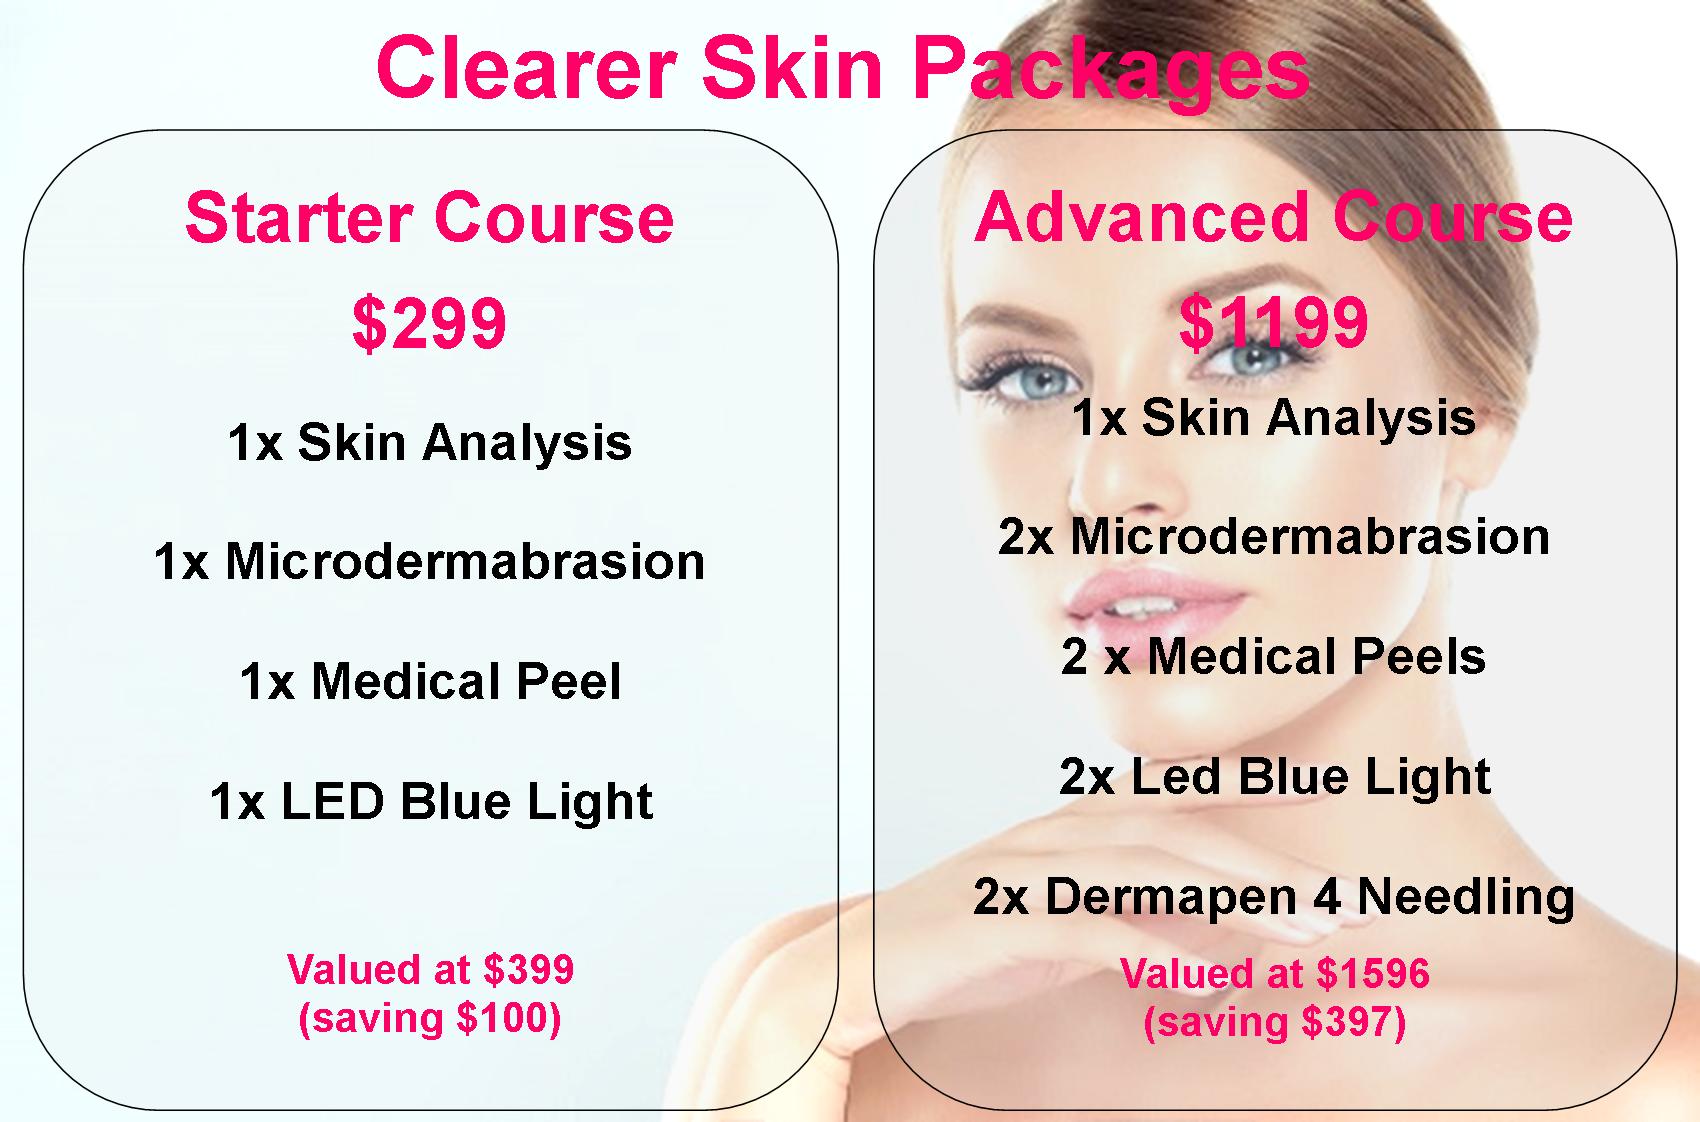 Cleaner Skin Packages